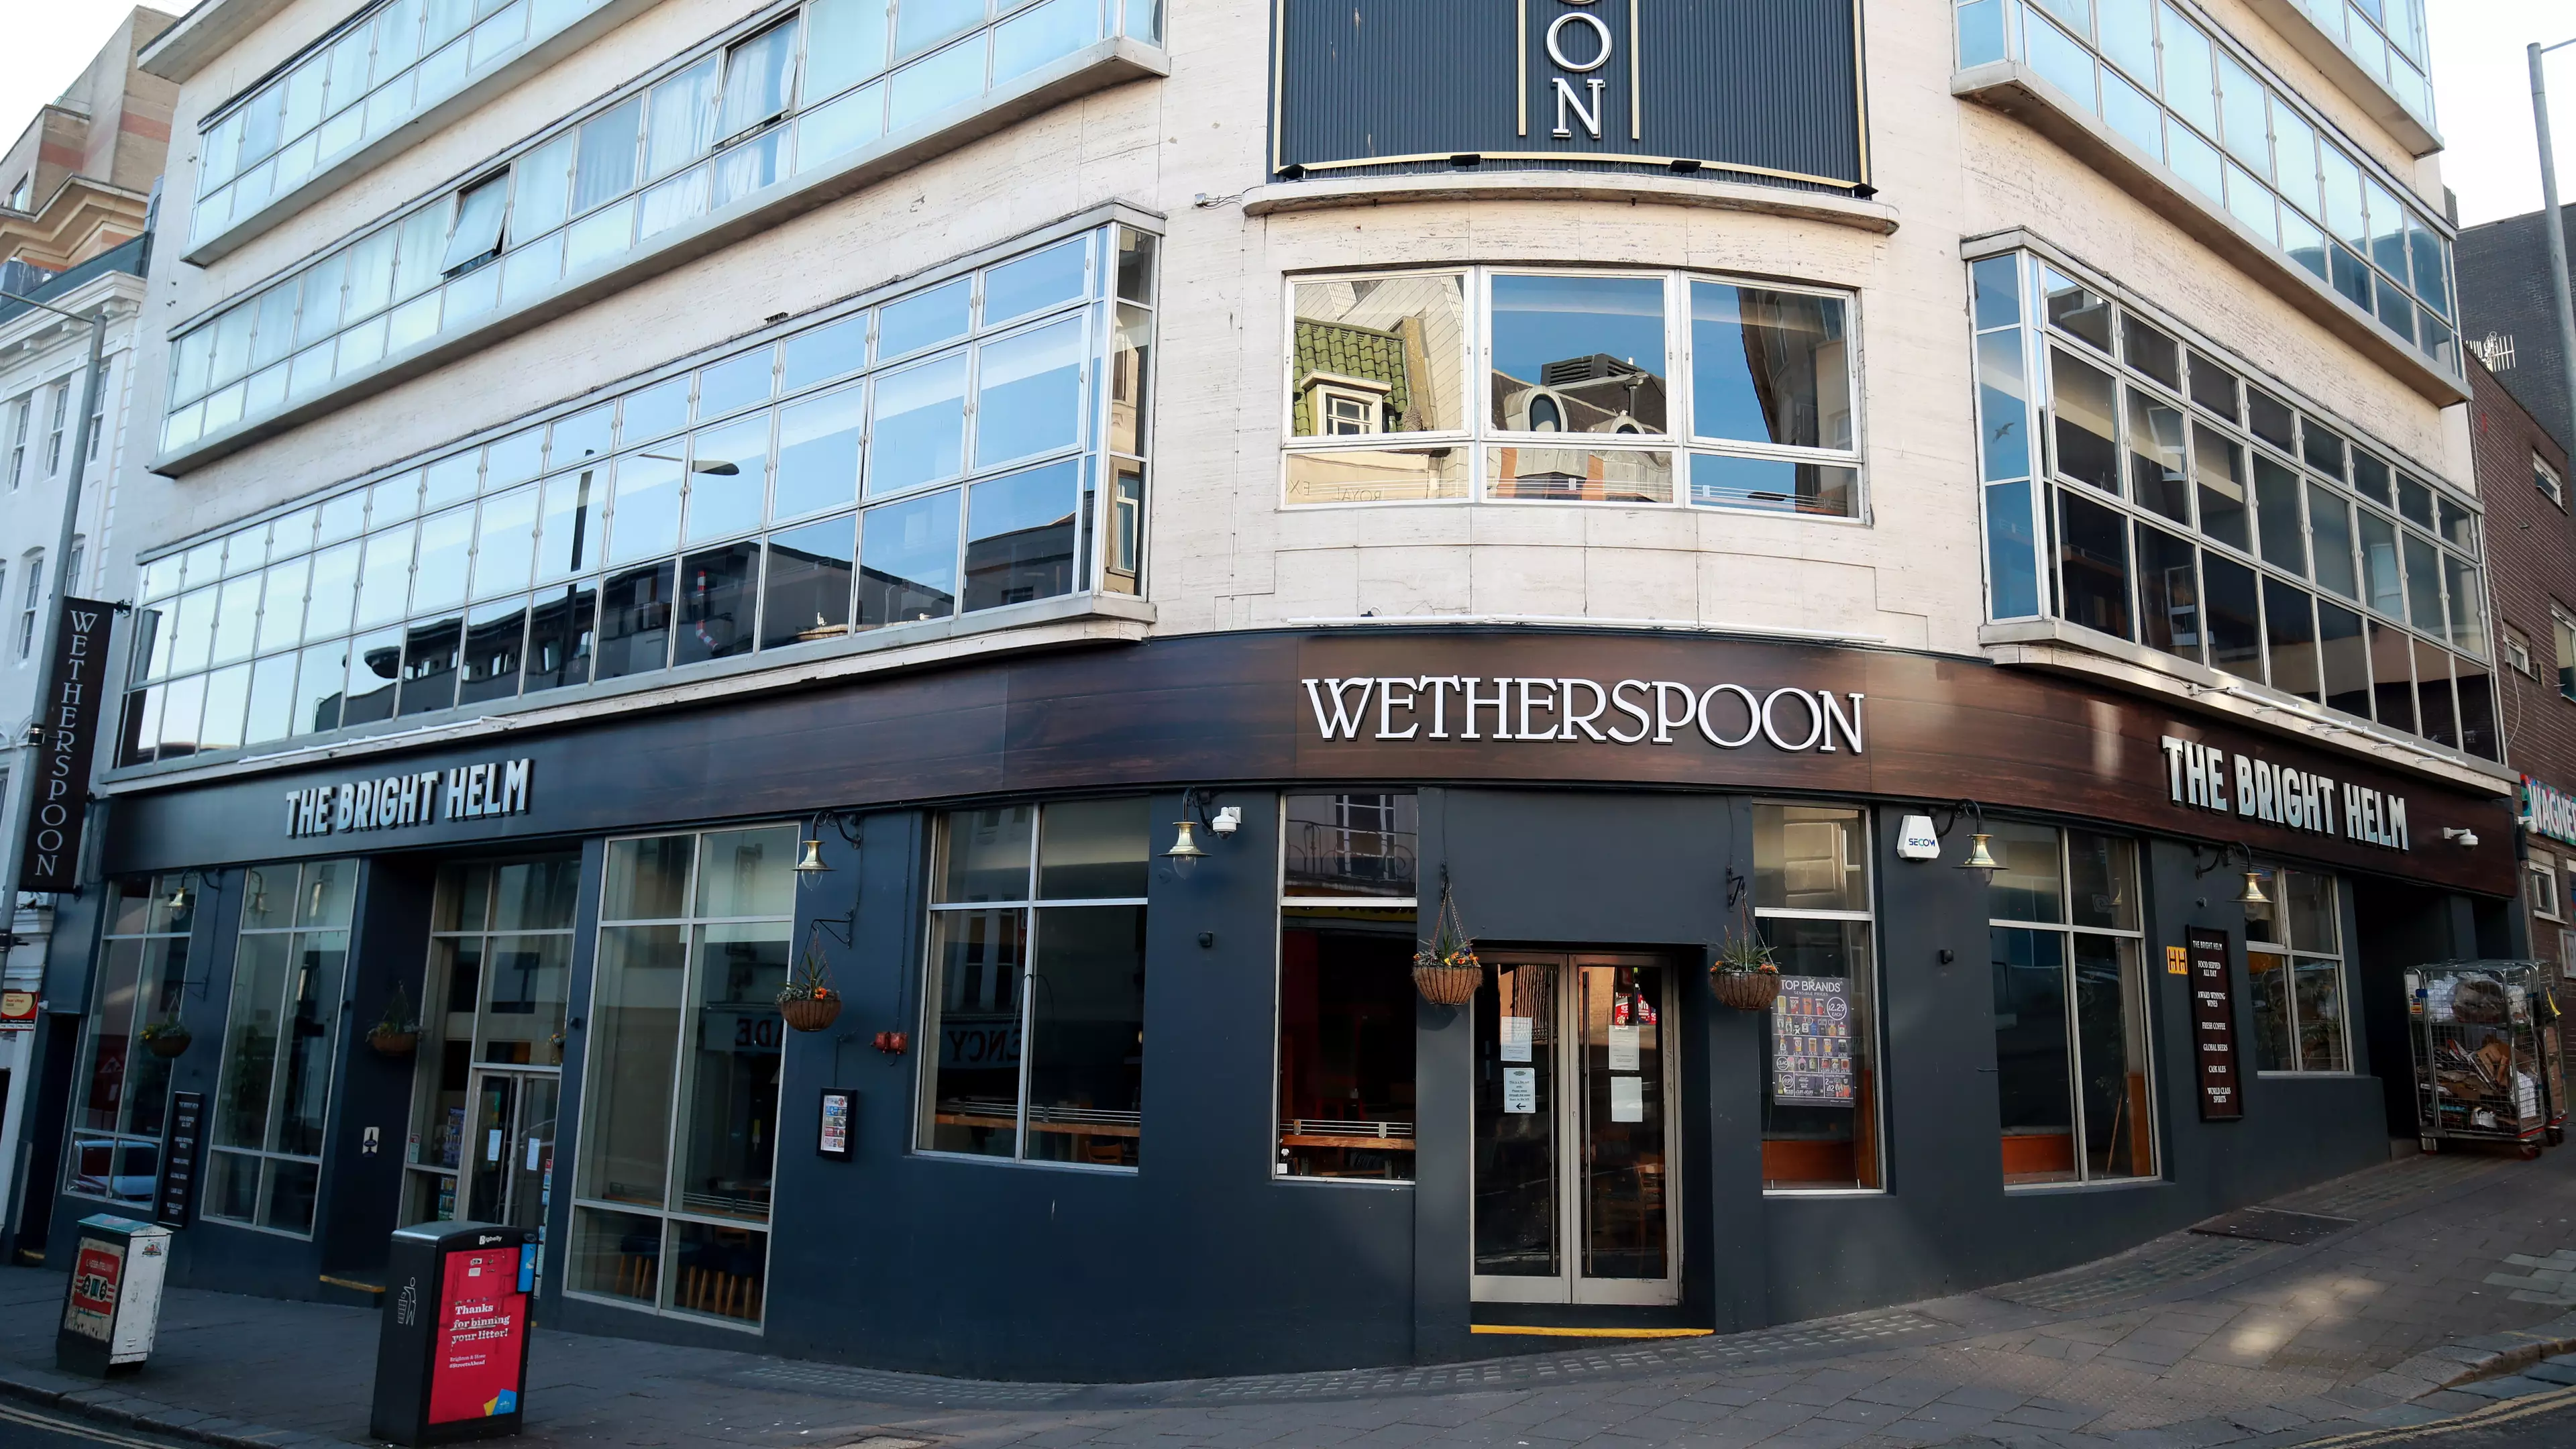 Wetherspoon Announces Plans To Reopen Pubs With Limited Menu And Safety Screens